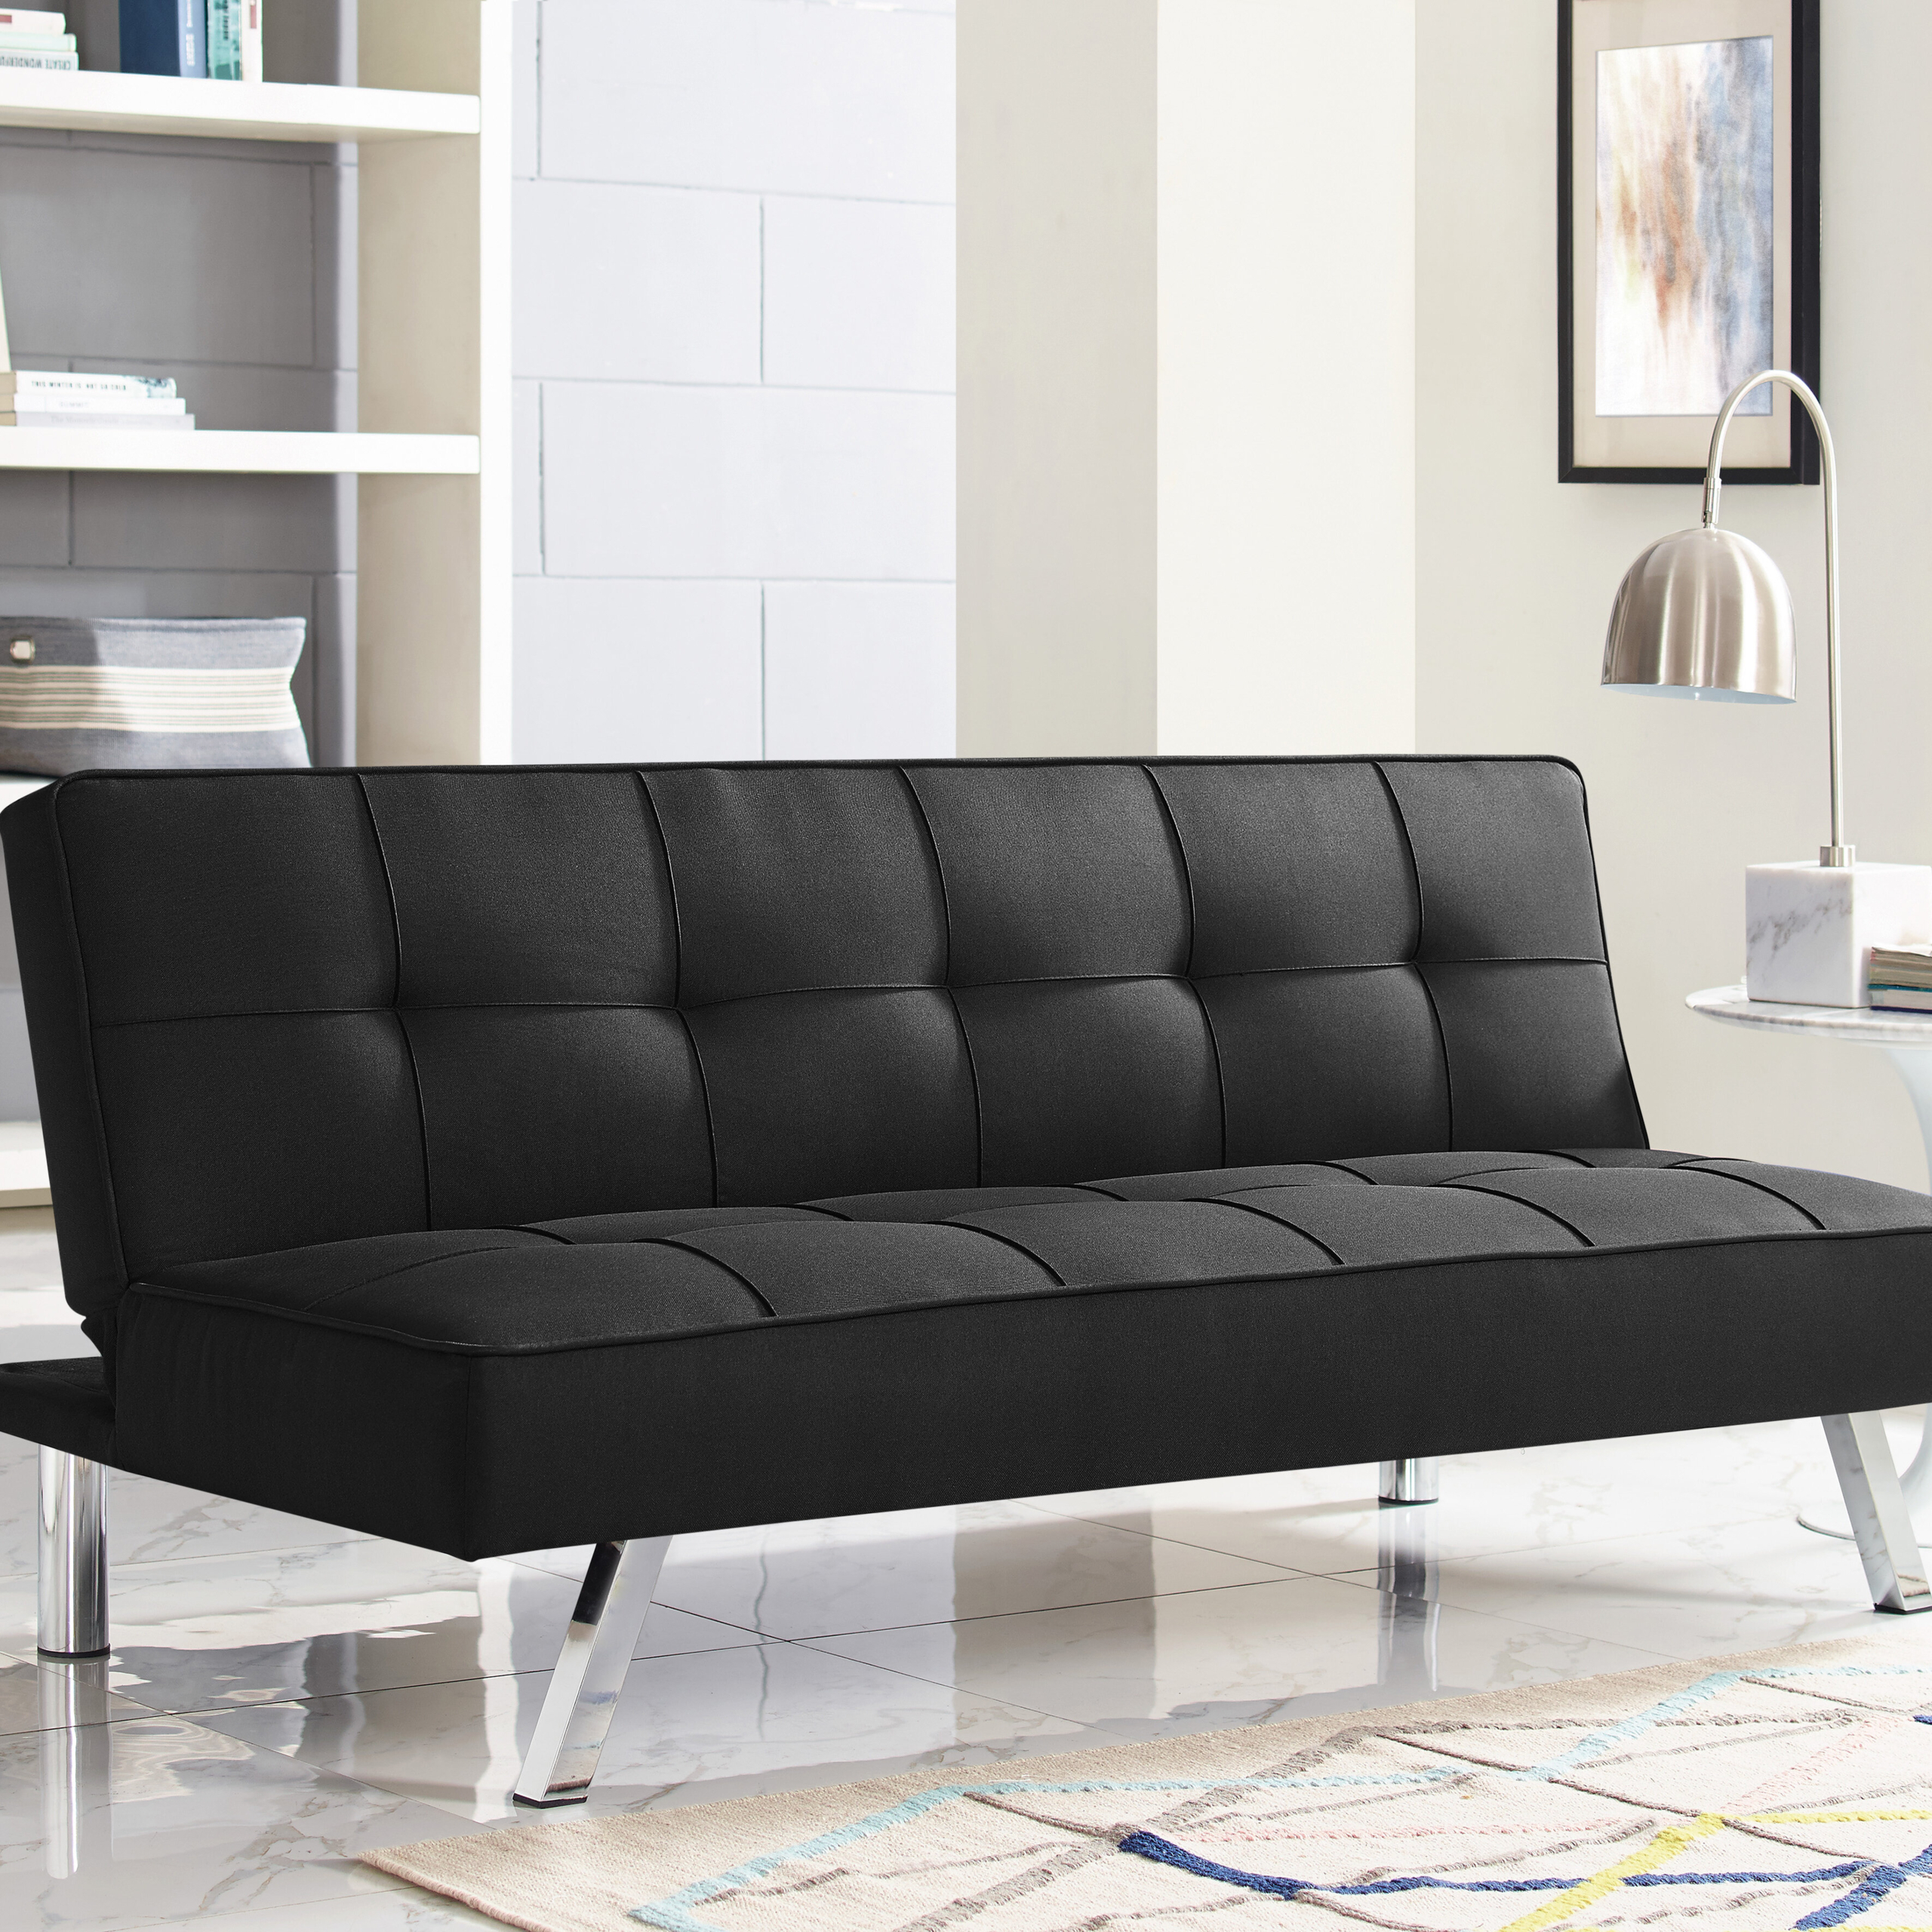 Click Clack Sofa Beds: What are Click Clack Sofa Beds used for